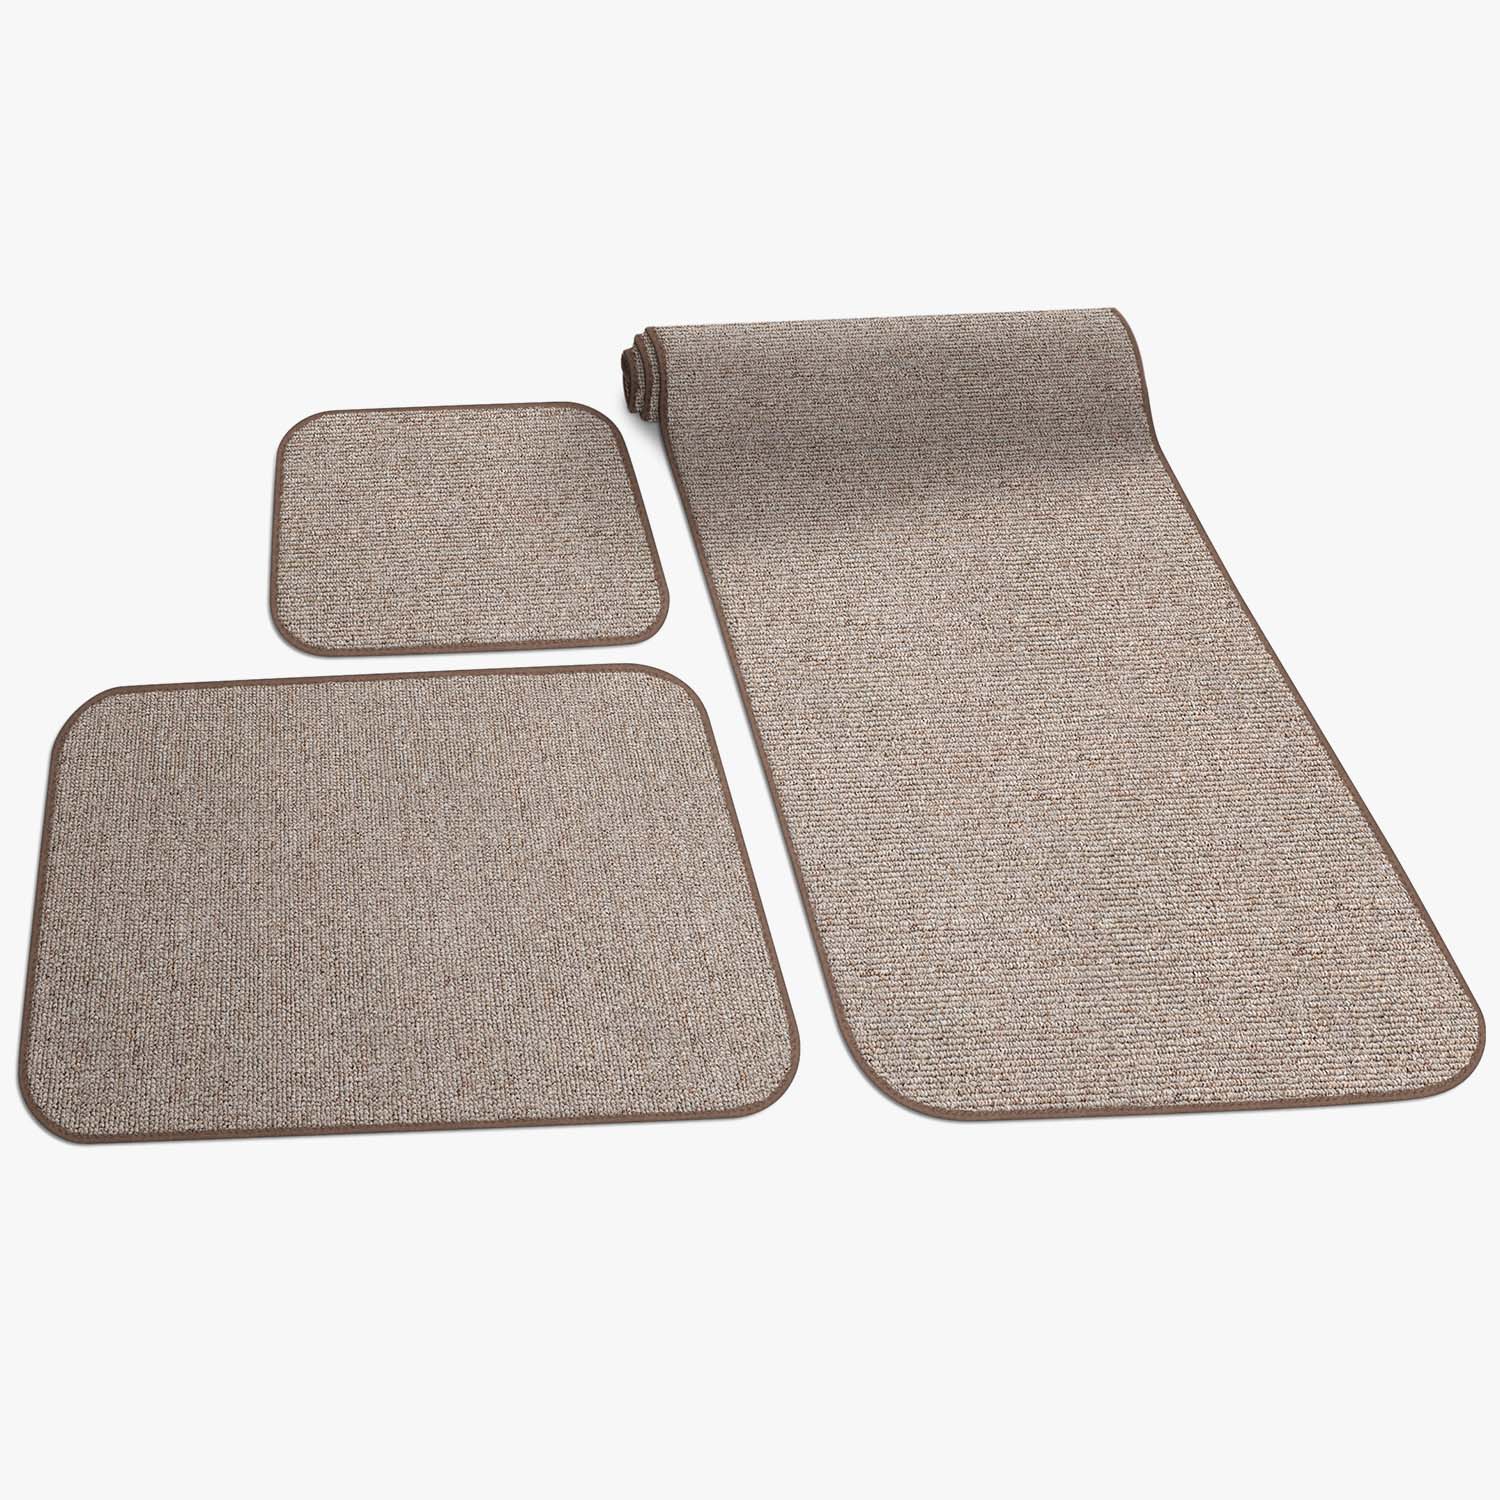 RV Outdoor Rugs & Mats - Prest-O-Fit Manufacturing, Inc